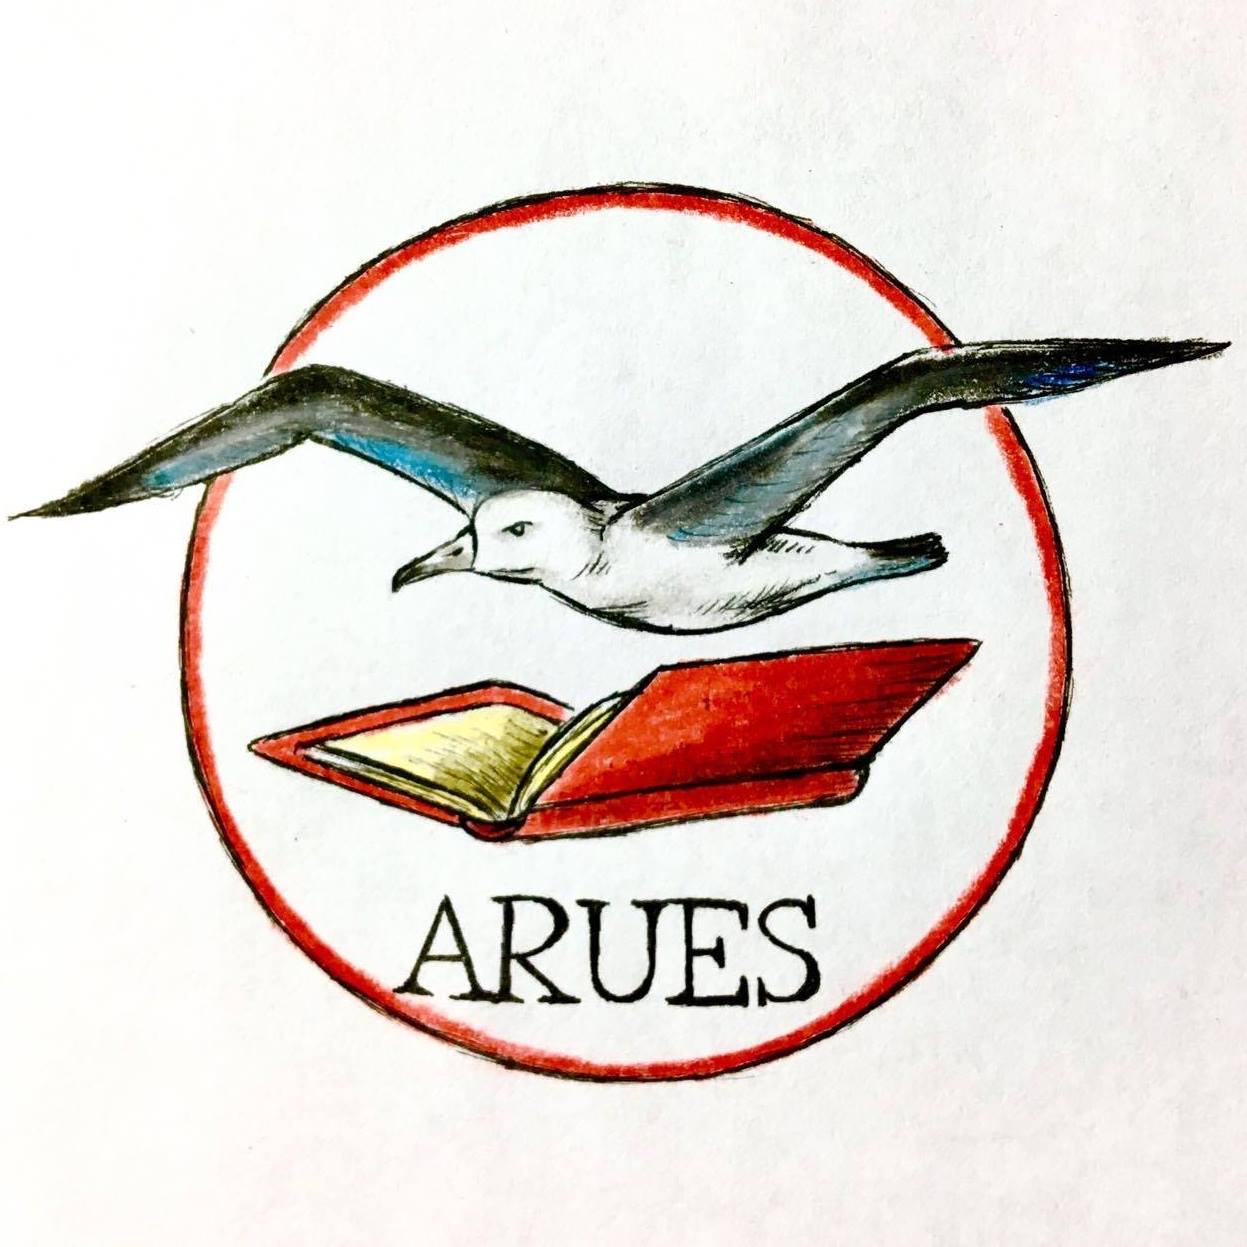 red circle on white background containing a large albatross above a red open book above the acronym "ARUES"